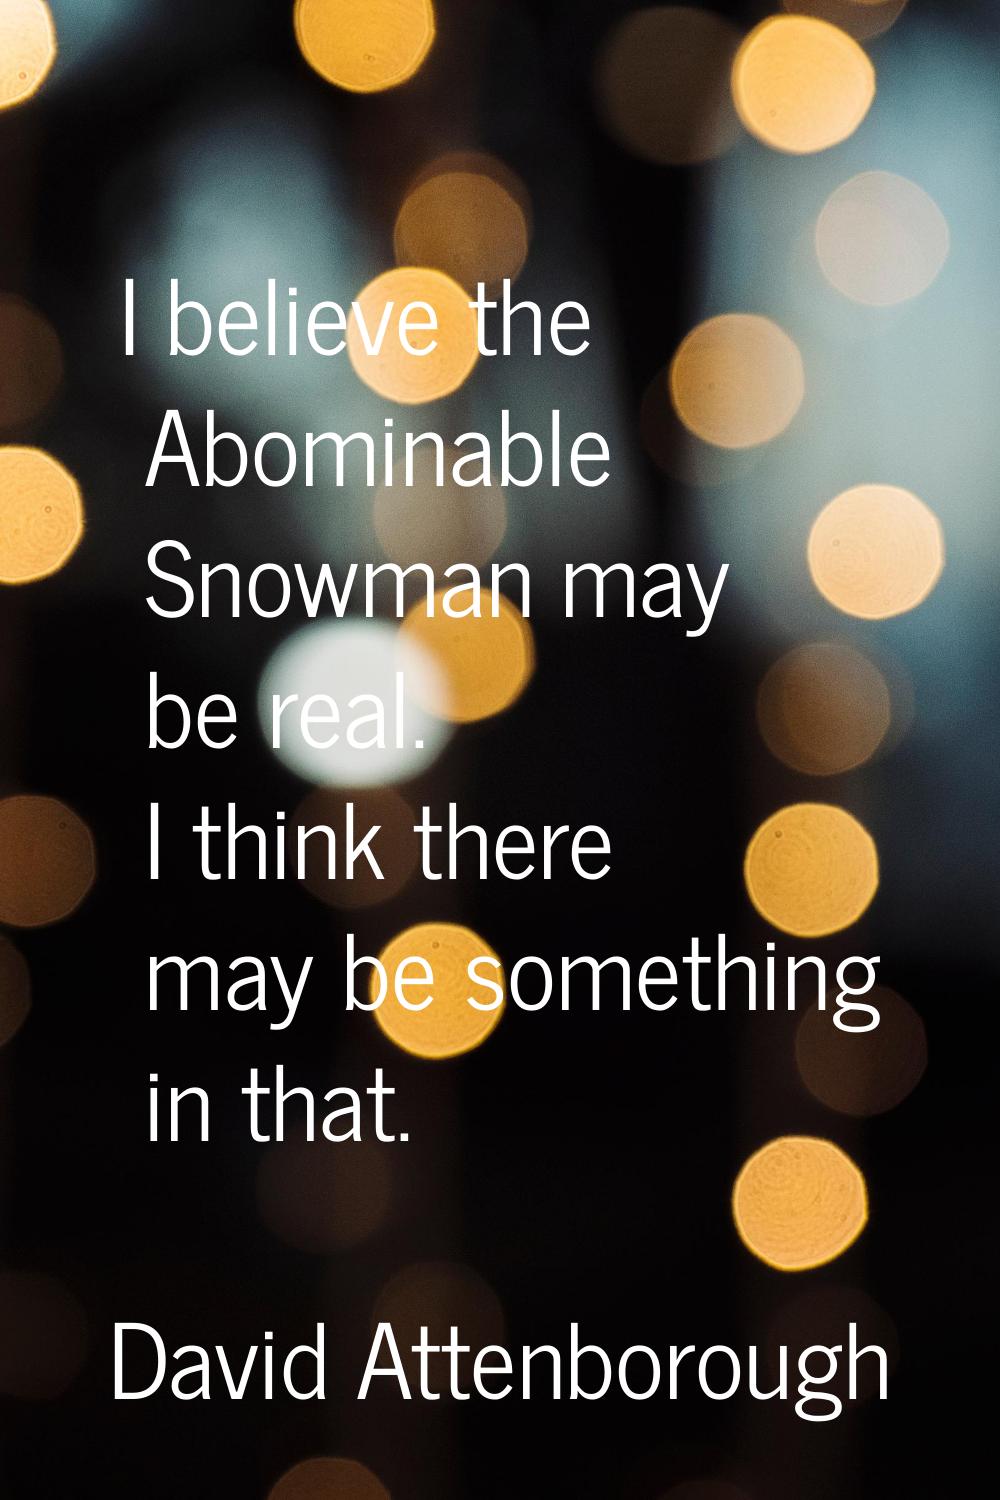 I believe the Abominable Snowman may be real. I think there may be something in that.